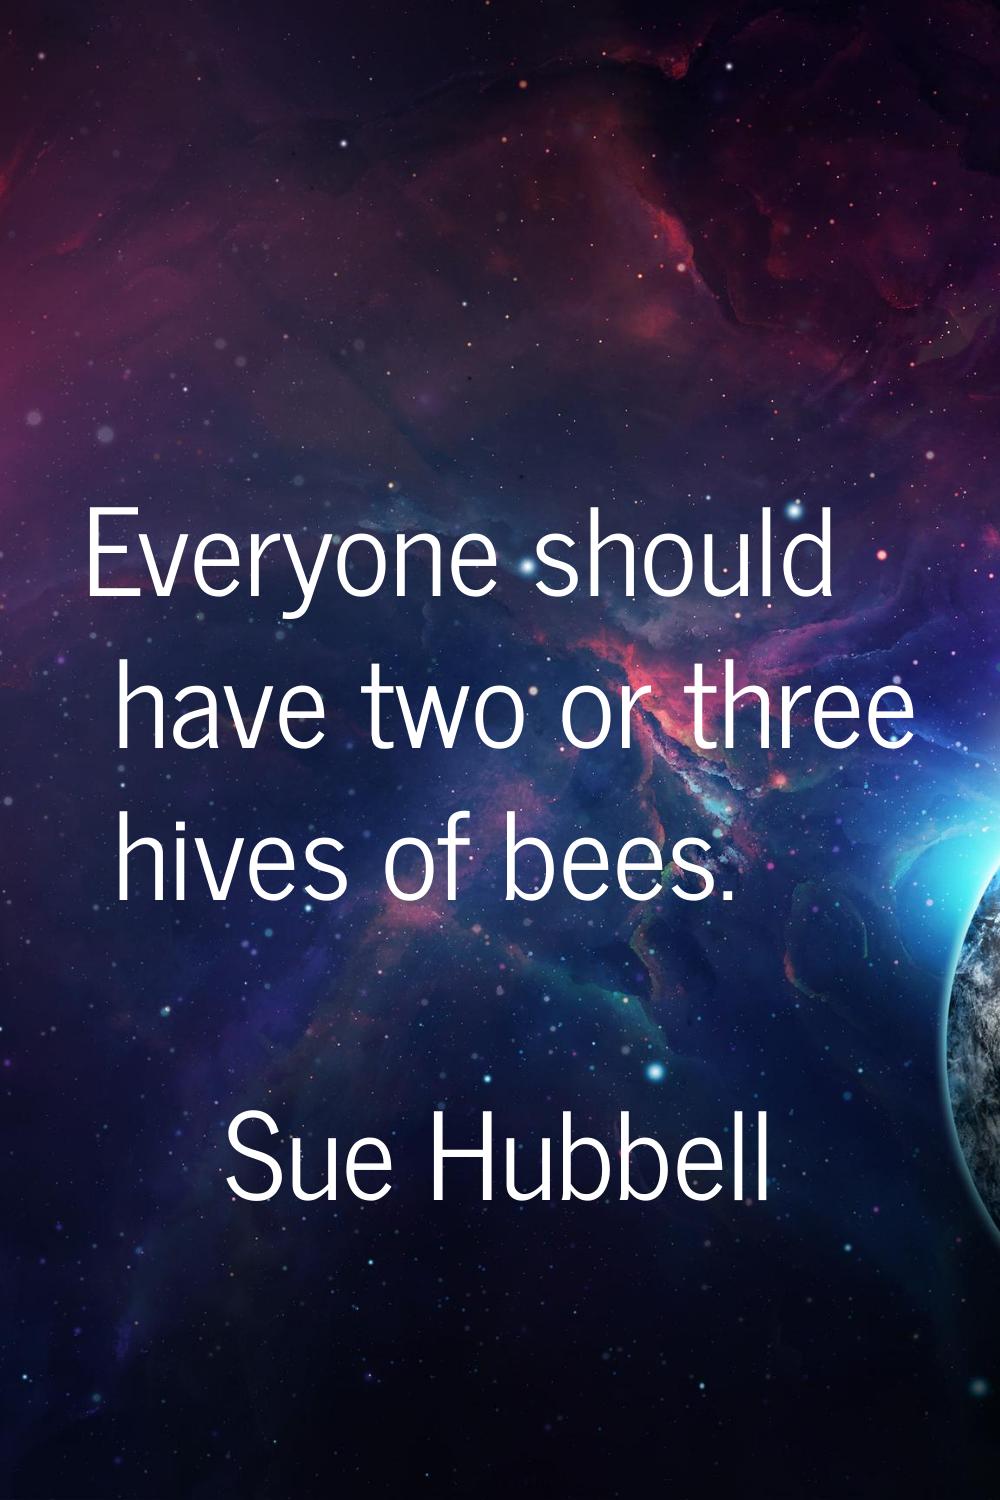 Everyone should have two or three hives of bees.